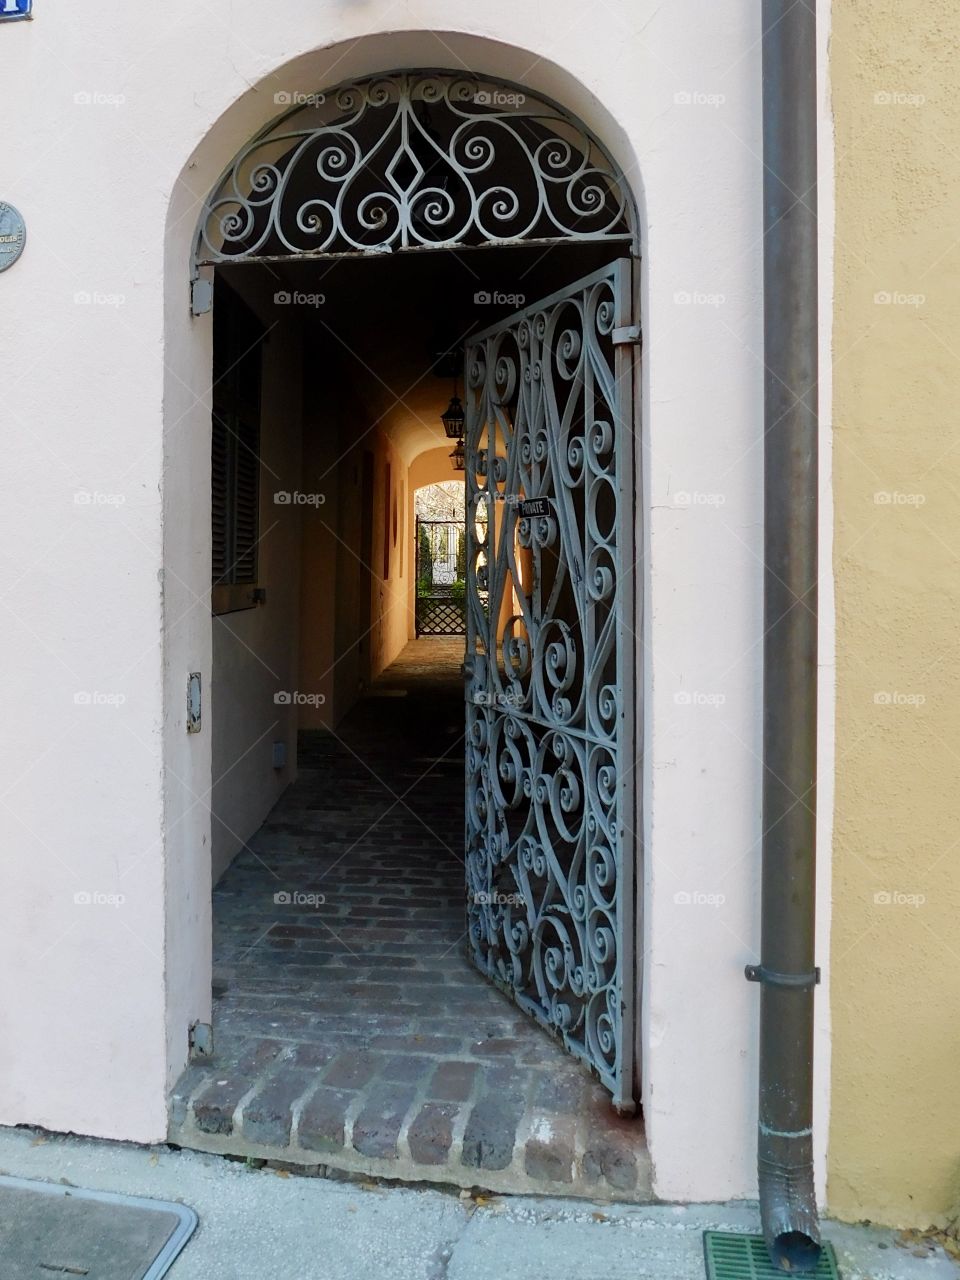 An open gate on the historic Rainbow Row in Charleston, SC, seems to invite you into its hidden courtyard beyond.